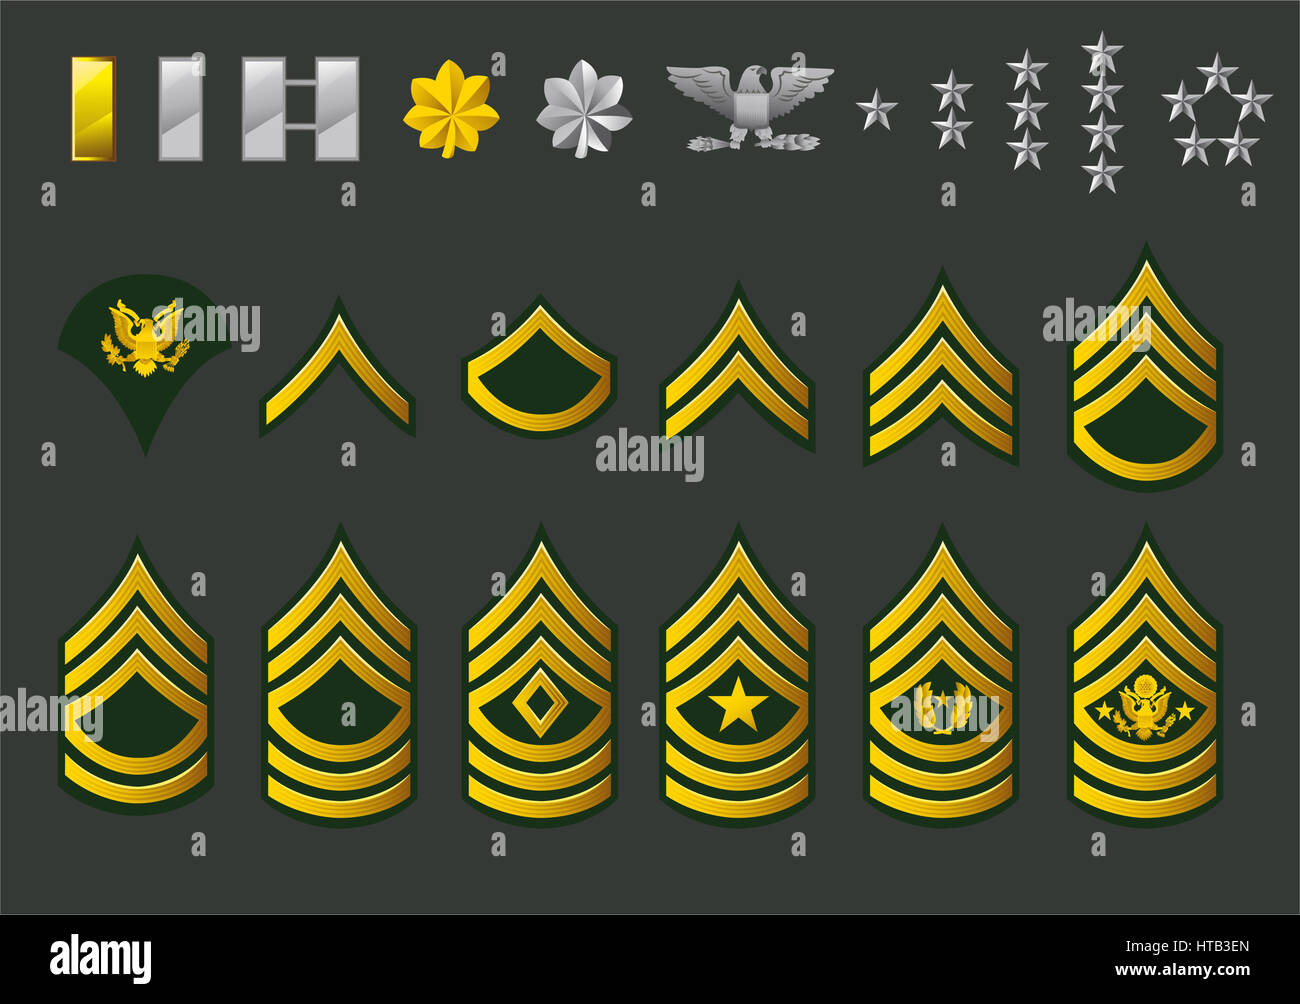 Army Enlisted Rank Structure